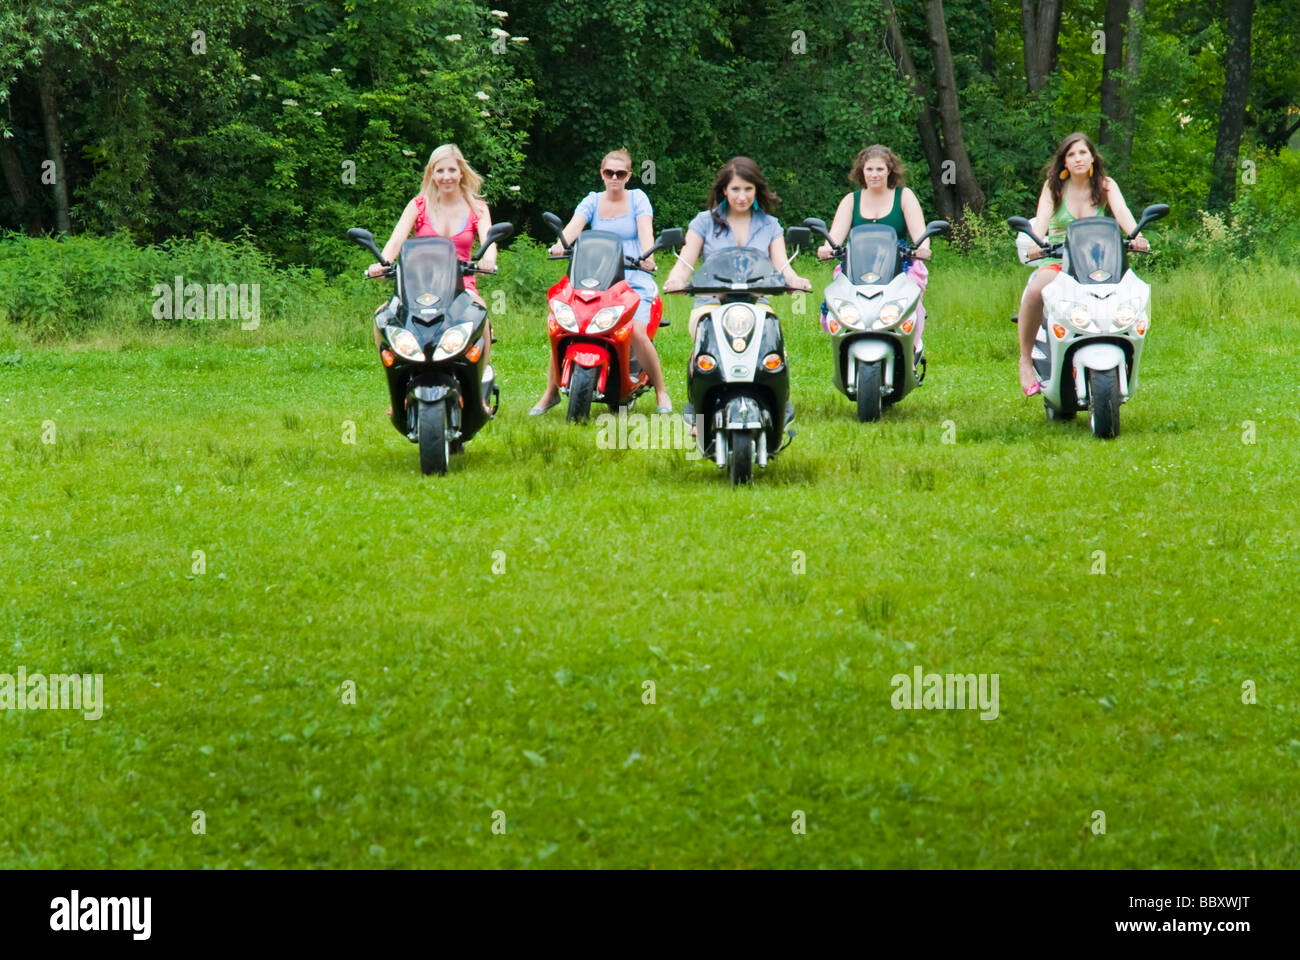 Five girls on electric motorbikes driving in a park Stock Photo